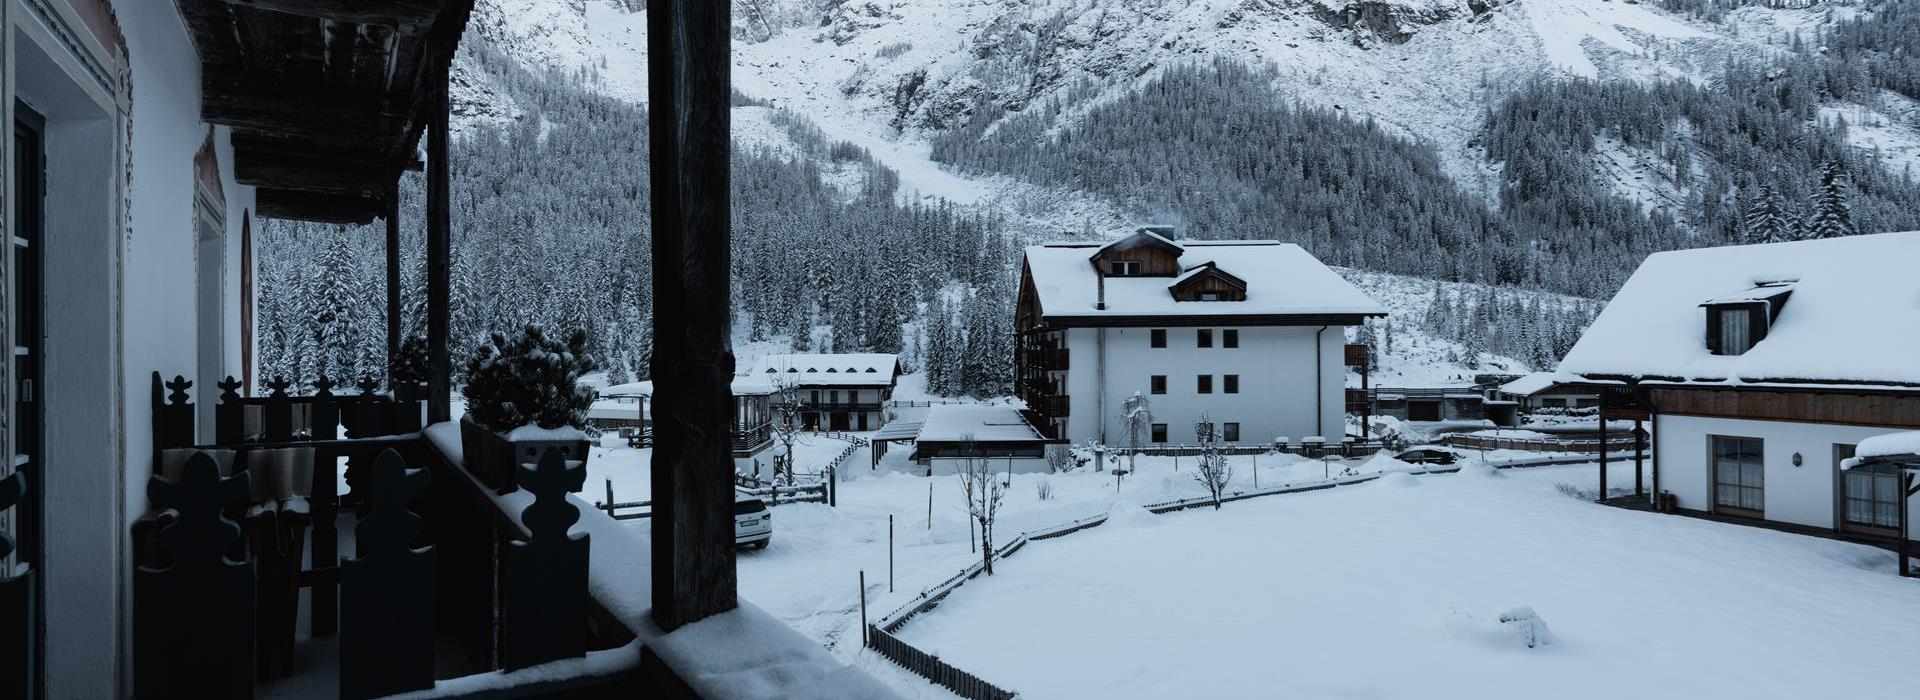 View from the balcony of the Suite Chalet in winter